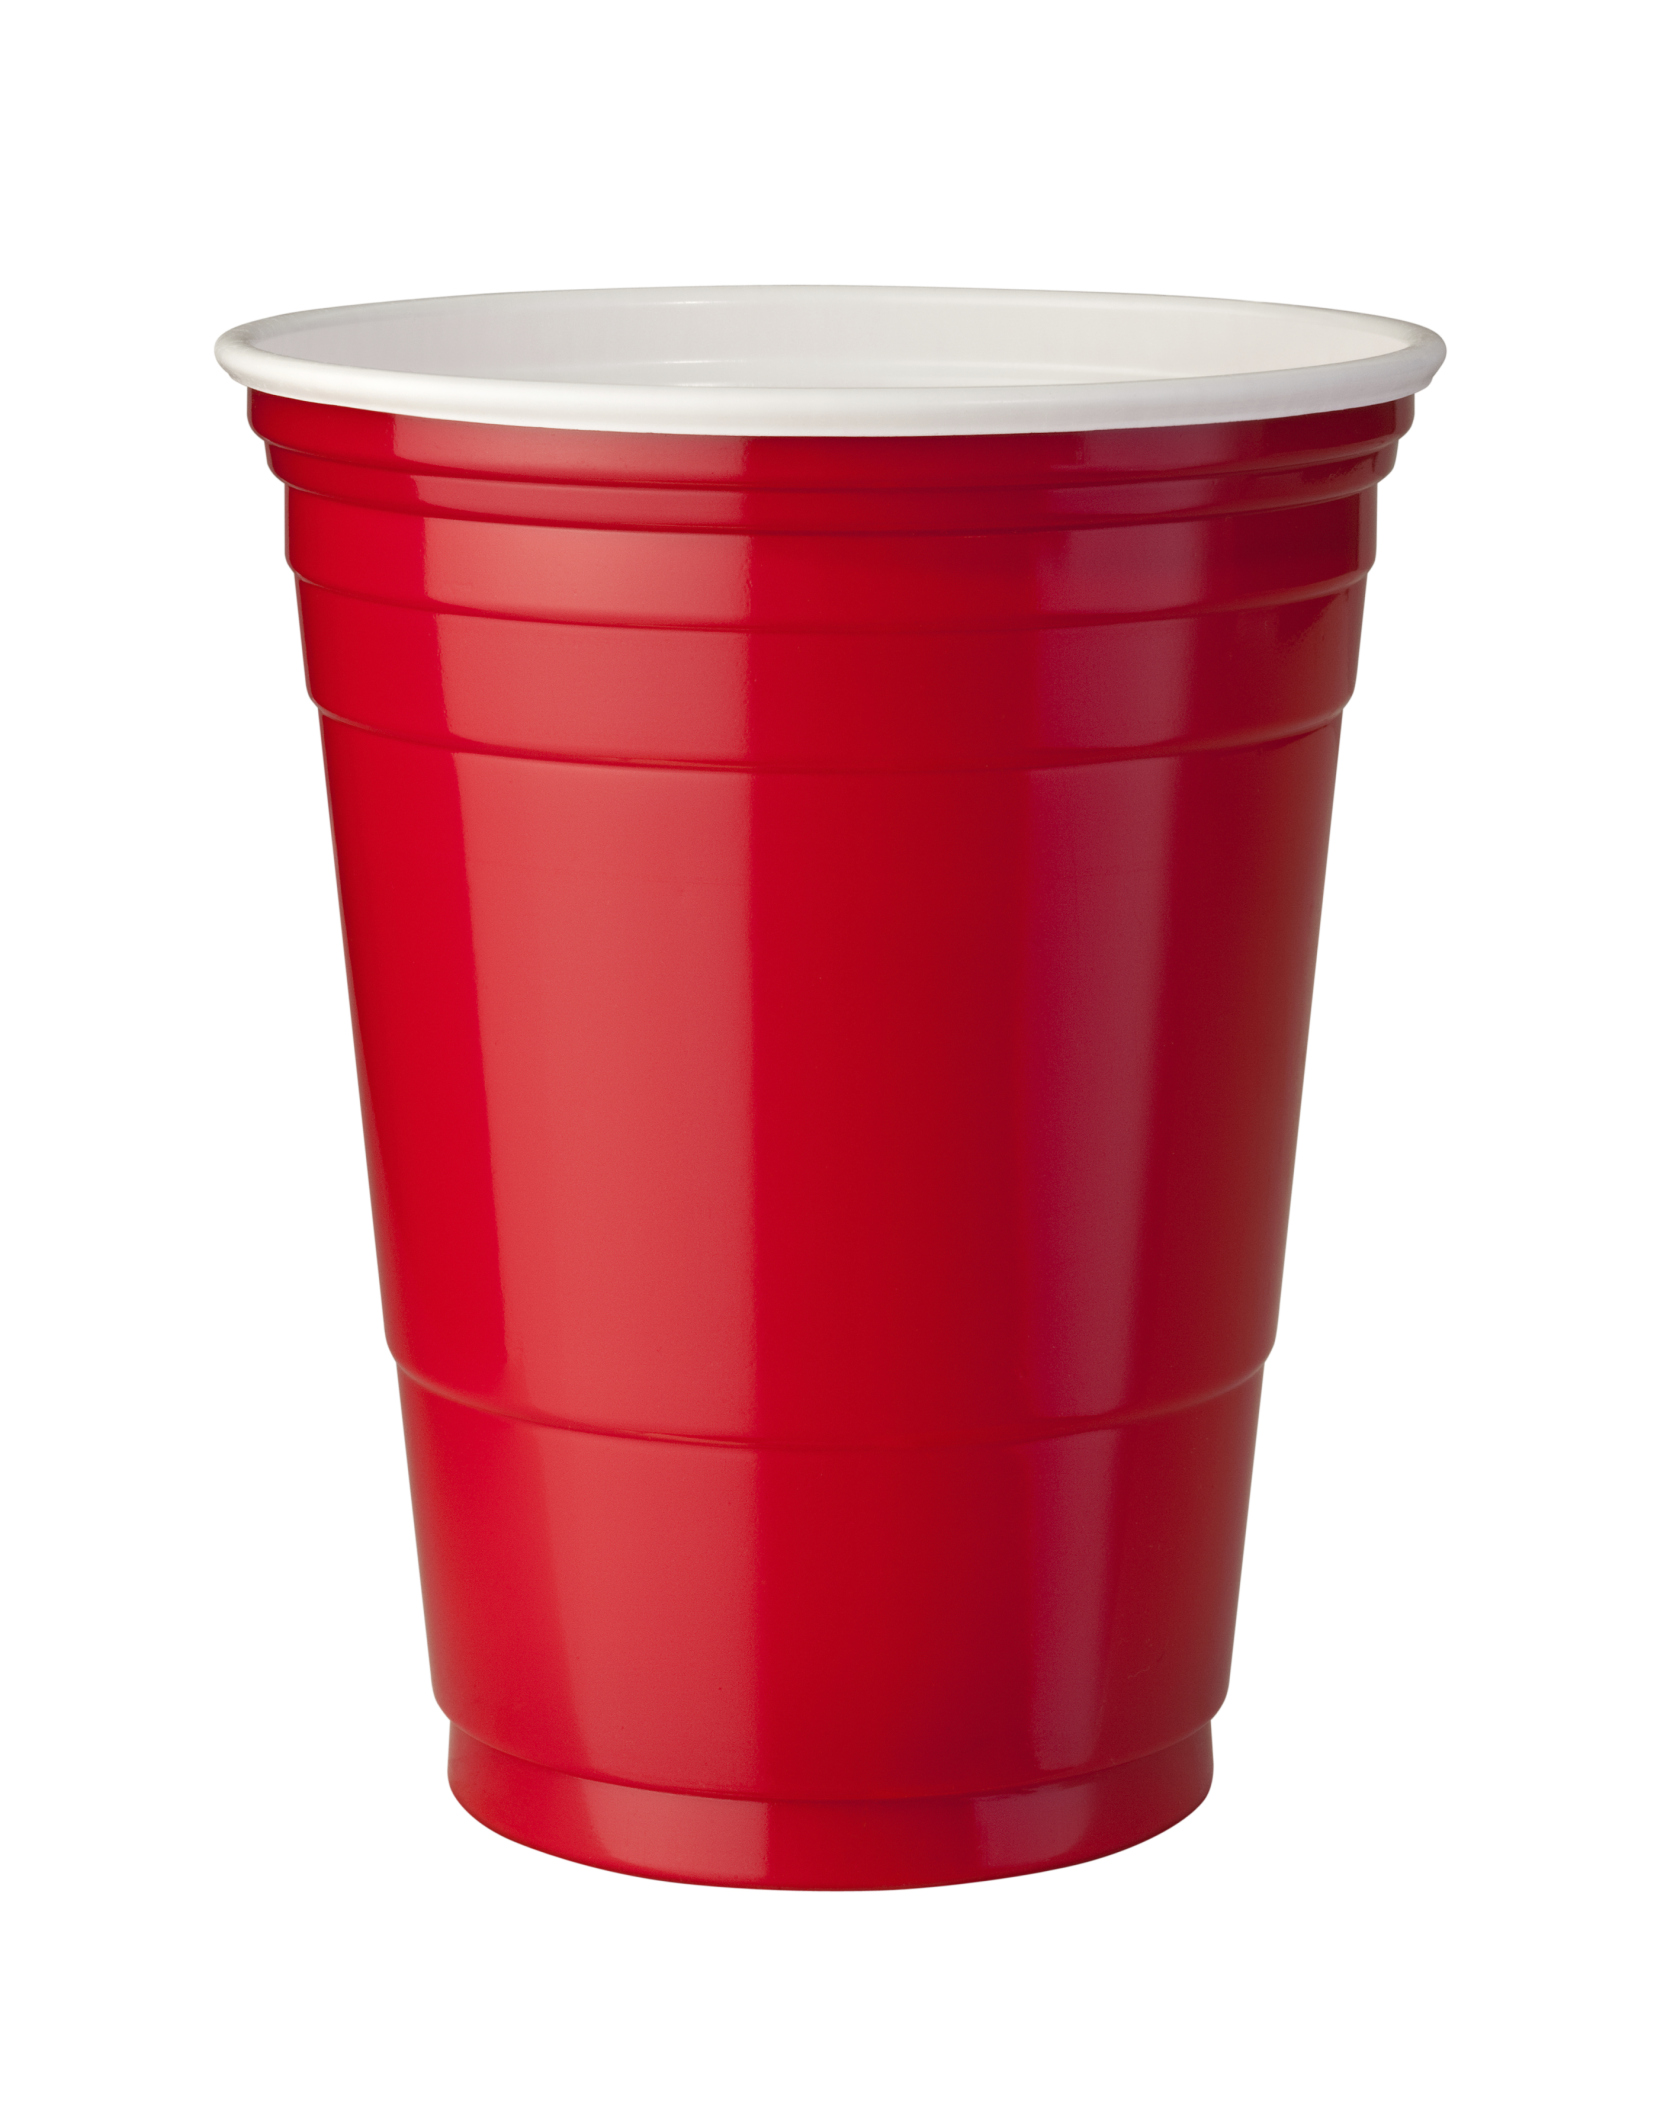 Red Solo Cup Jpg